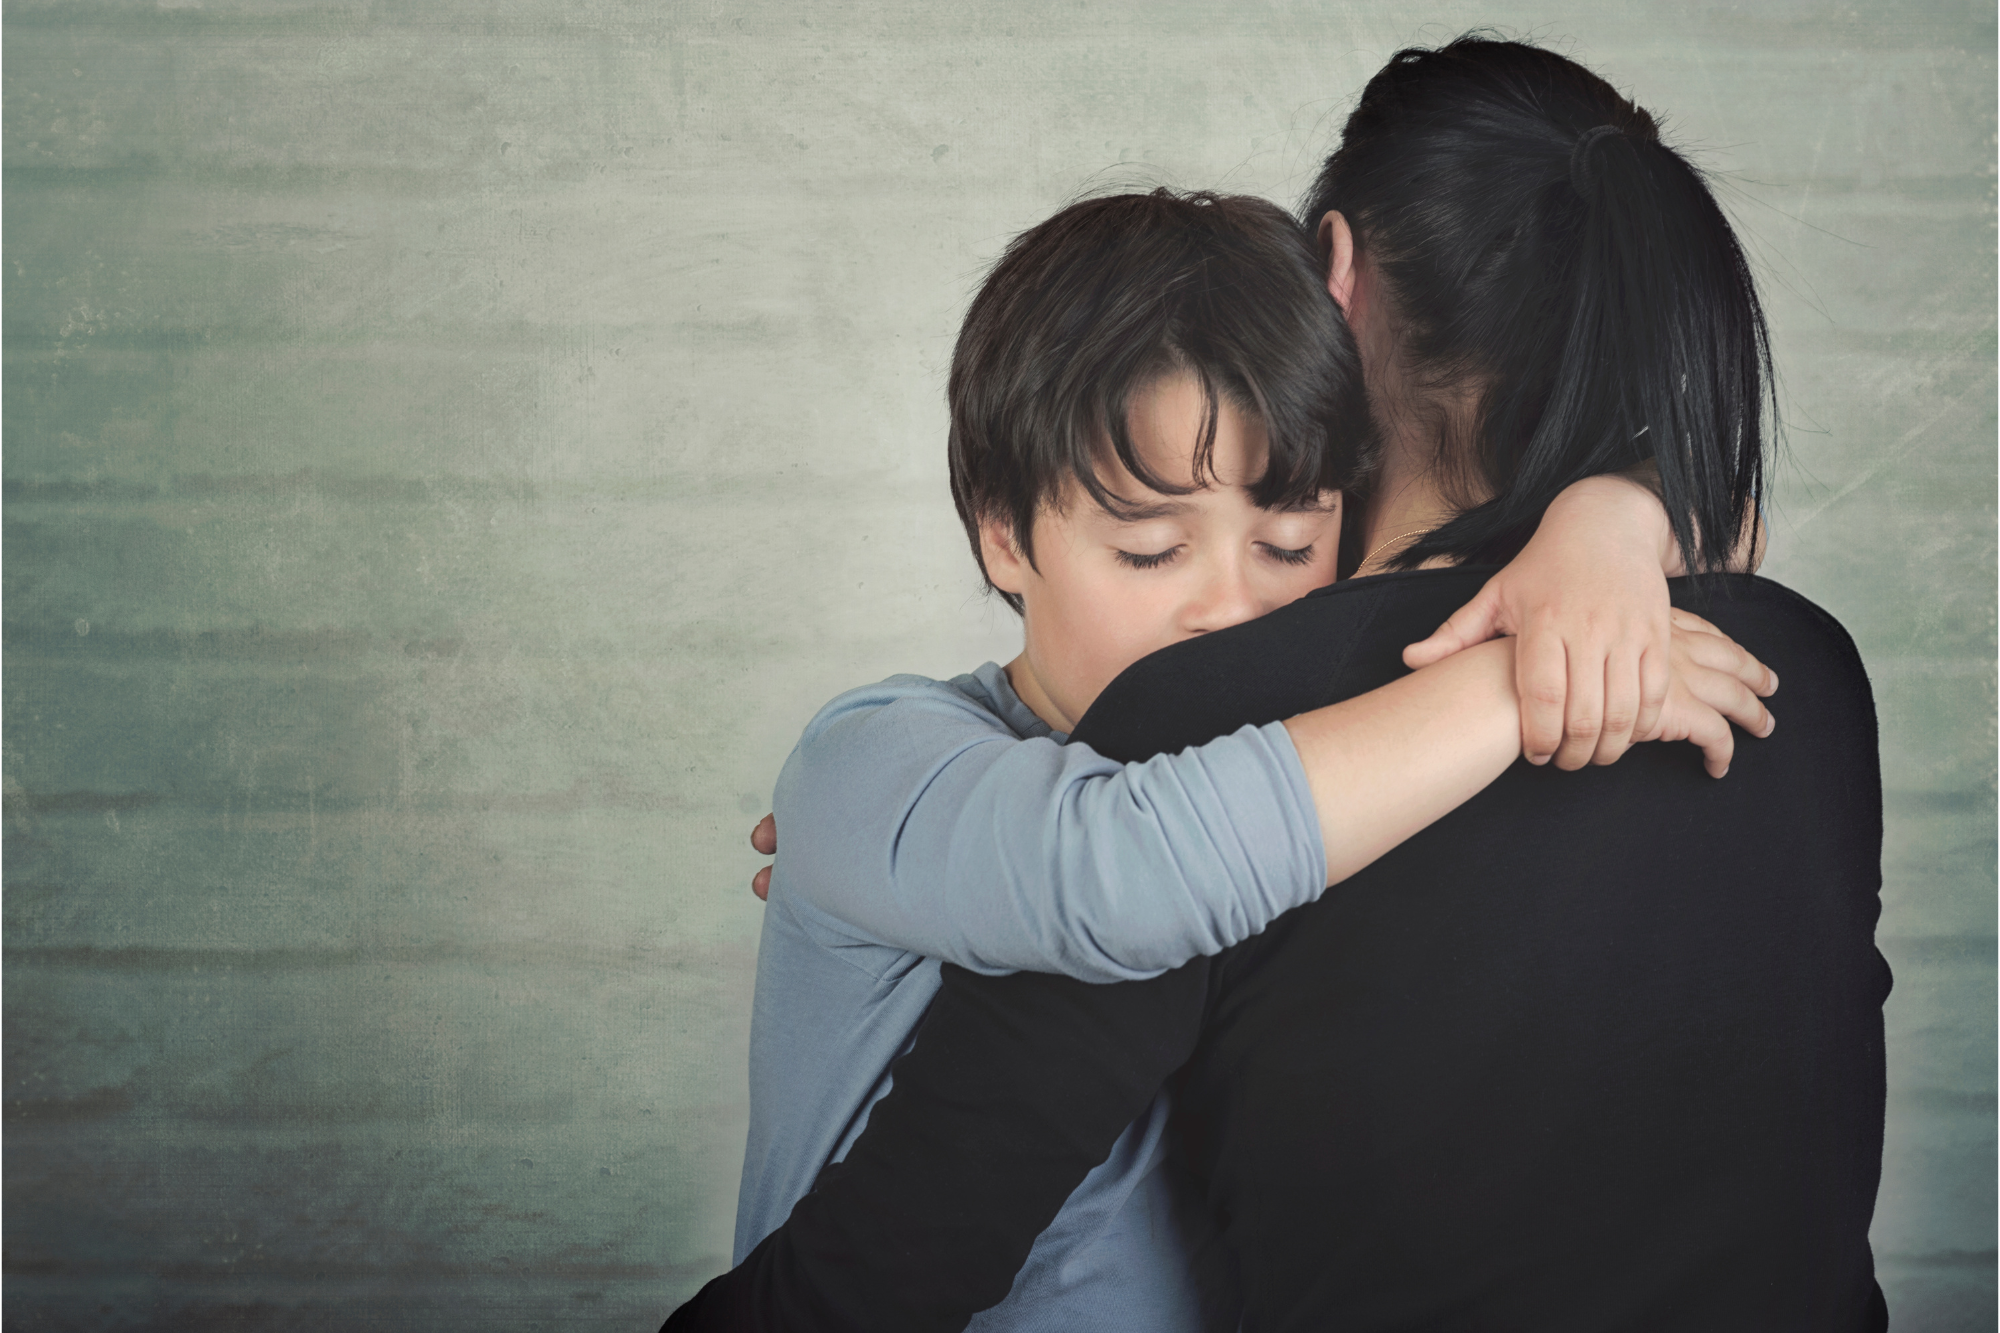 Mother hugs her son as she plans how to win custody of him against her narcissistic ex.